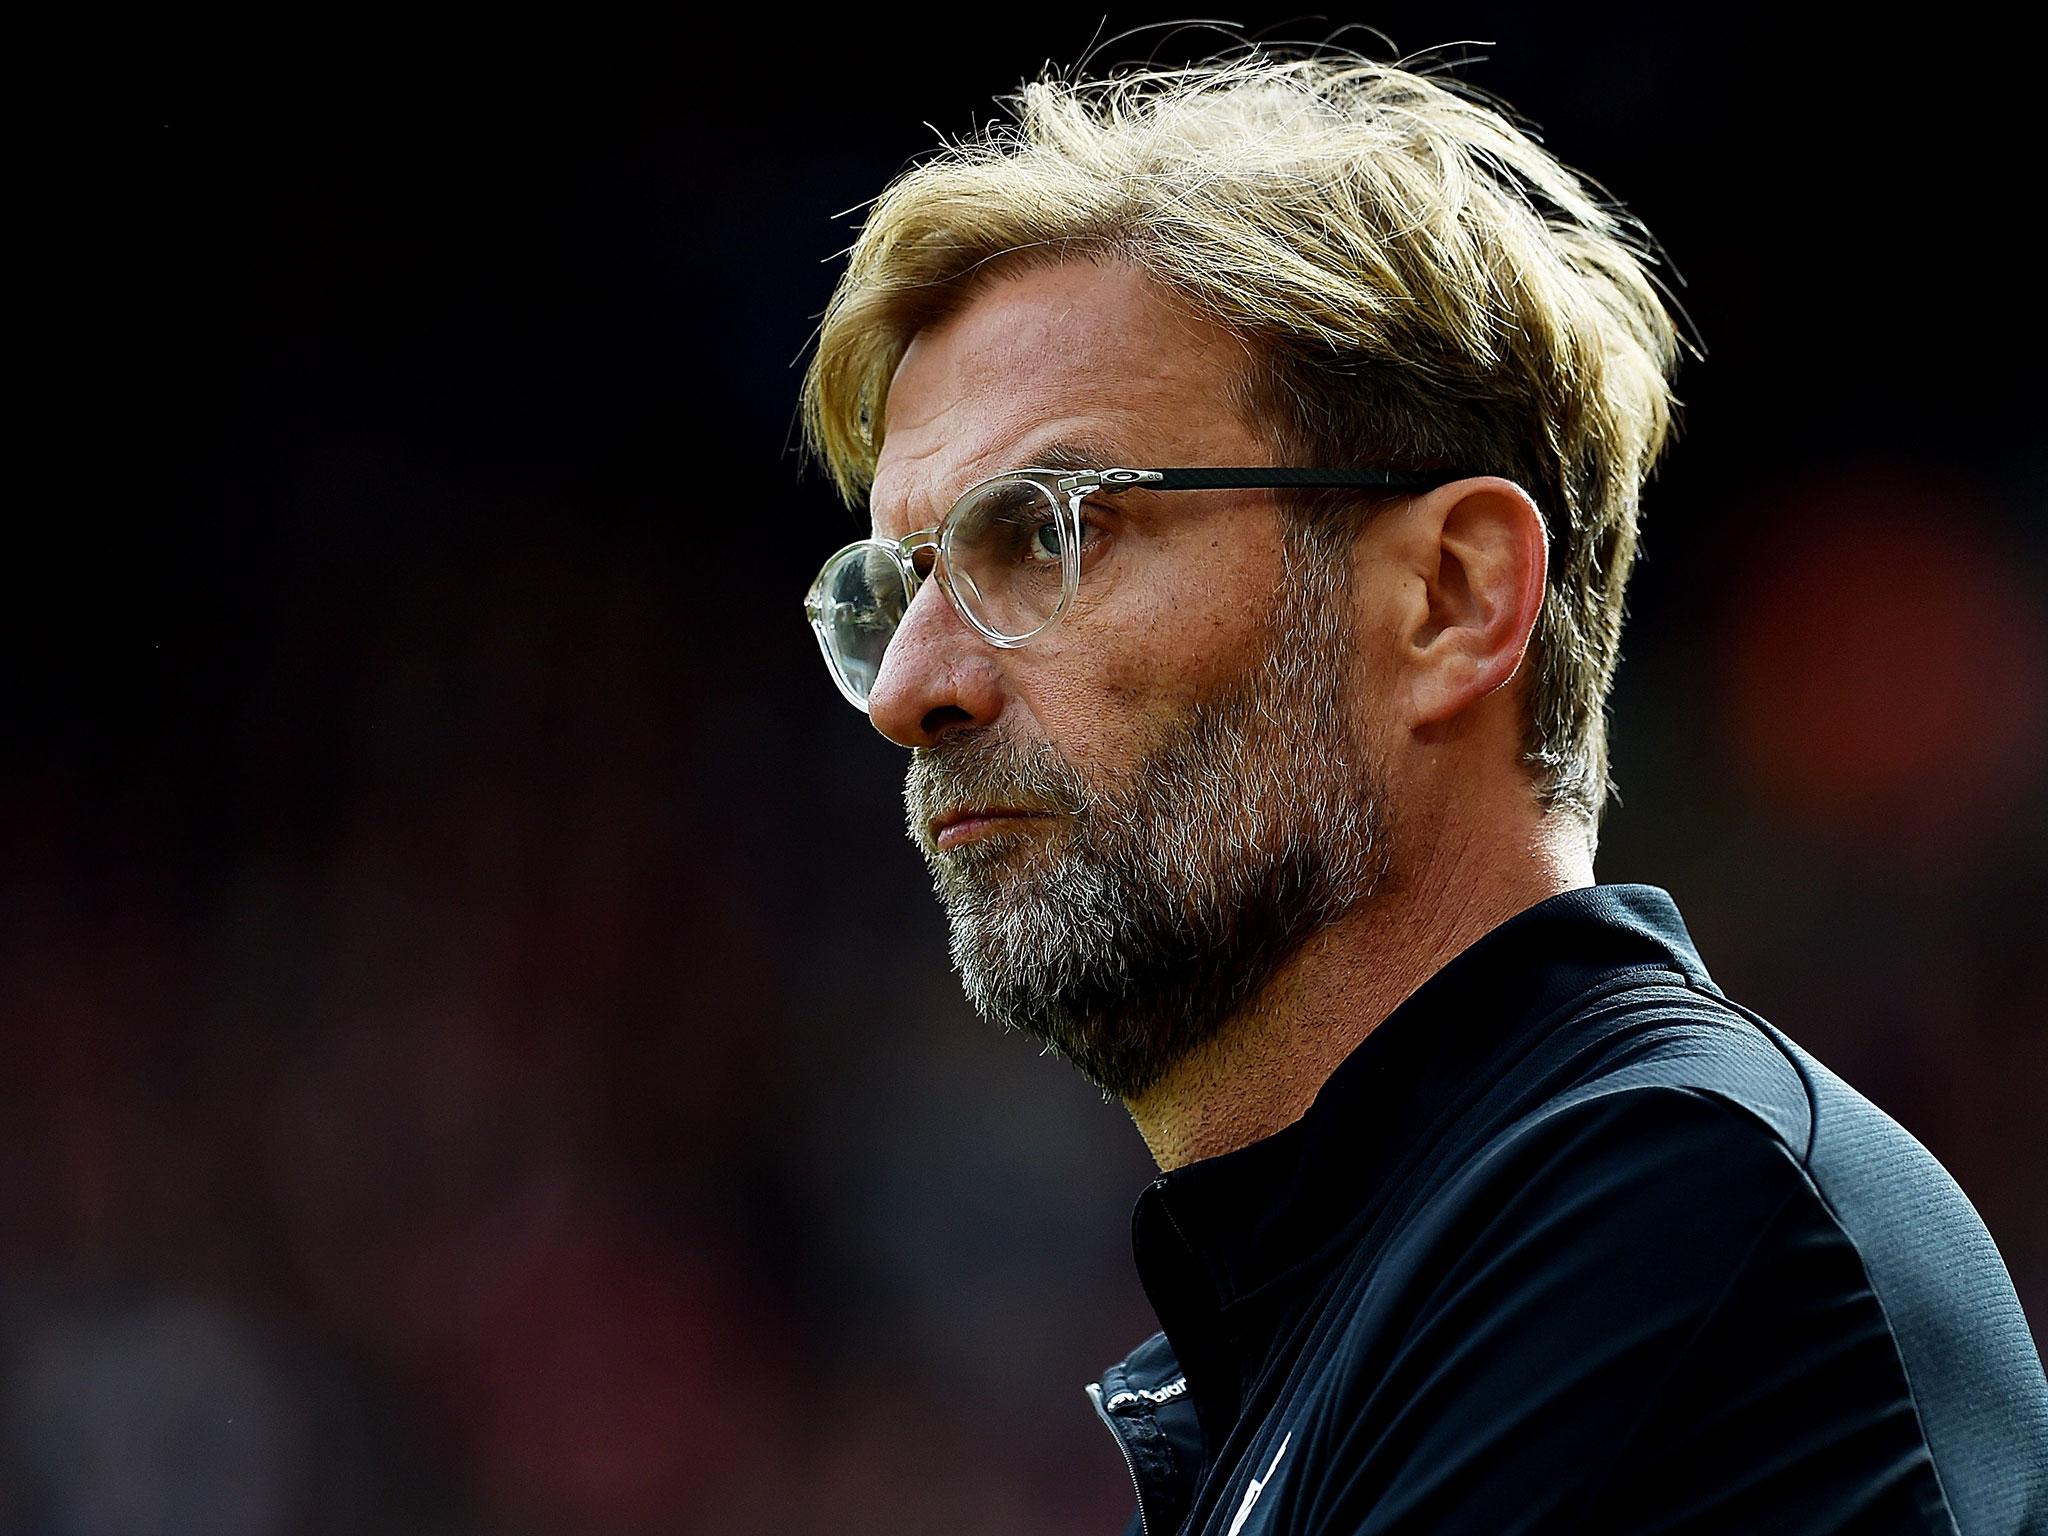 Jurgen Klopp has not won a trophy during his time with Liverpool